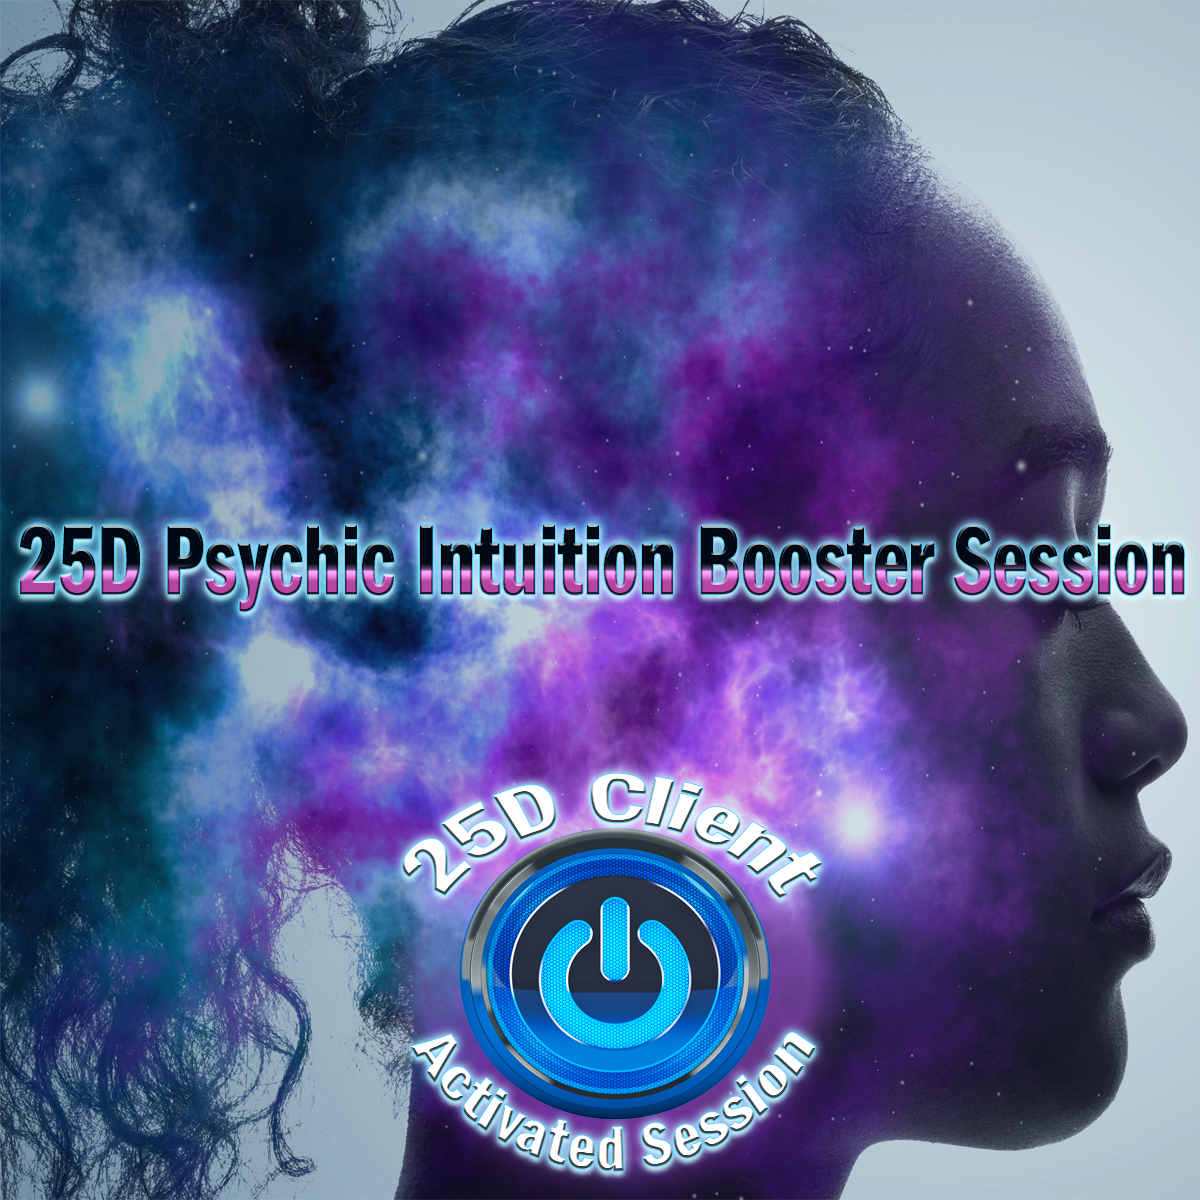 25d-client-activated-session-psychic-intuition-booster